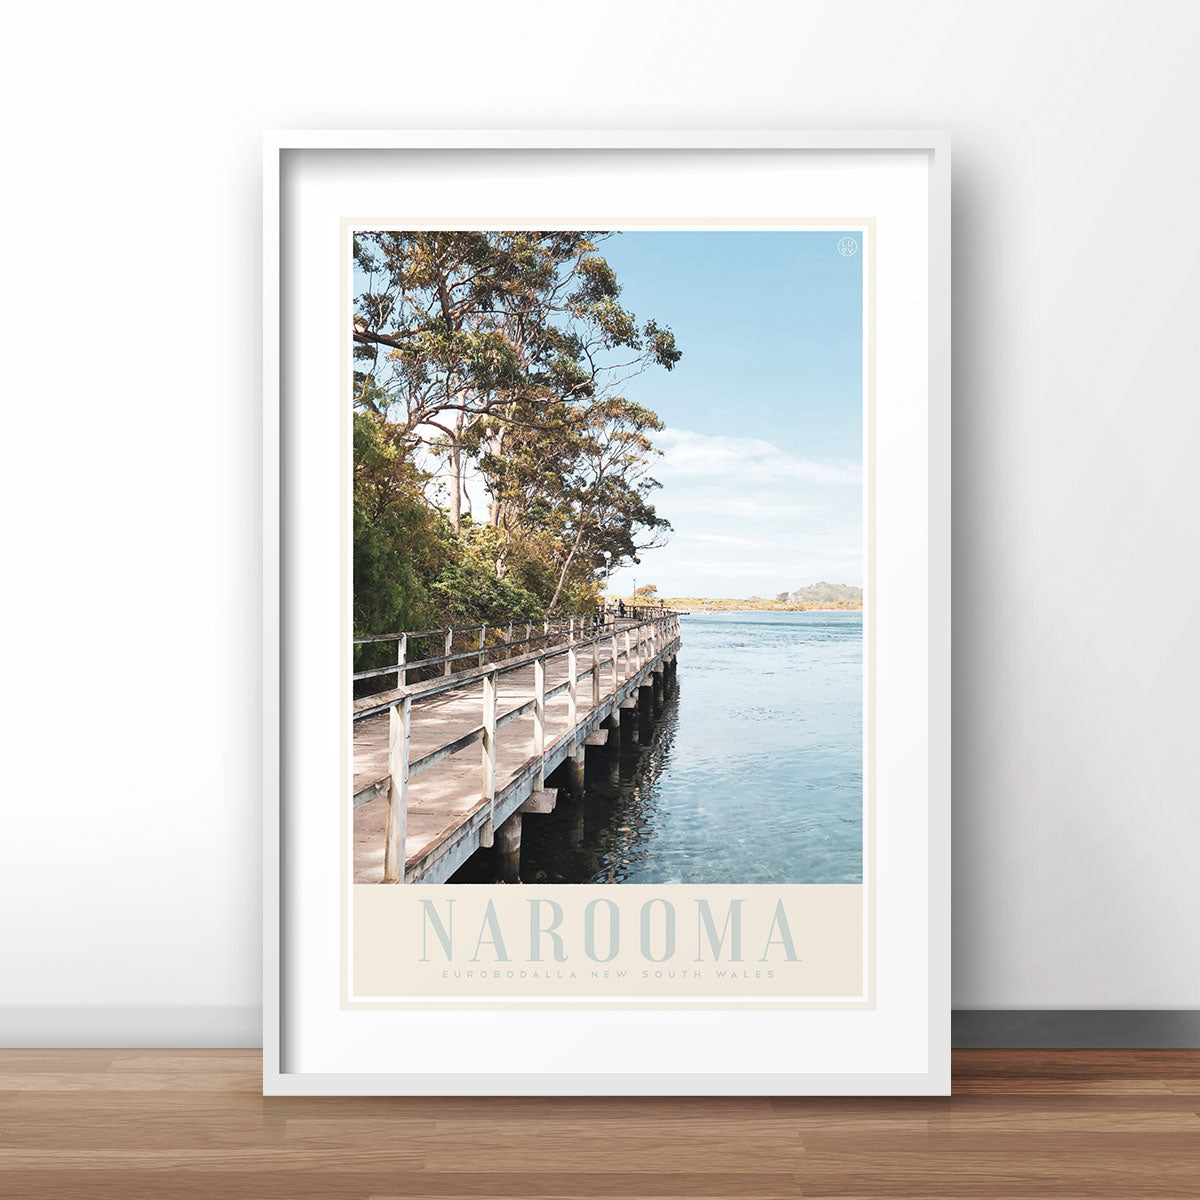 Narooma boardwalk vintage travel style print by places we luv